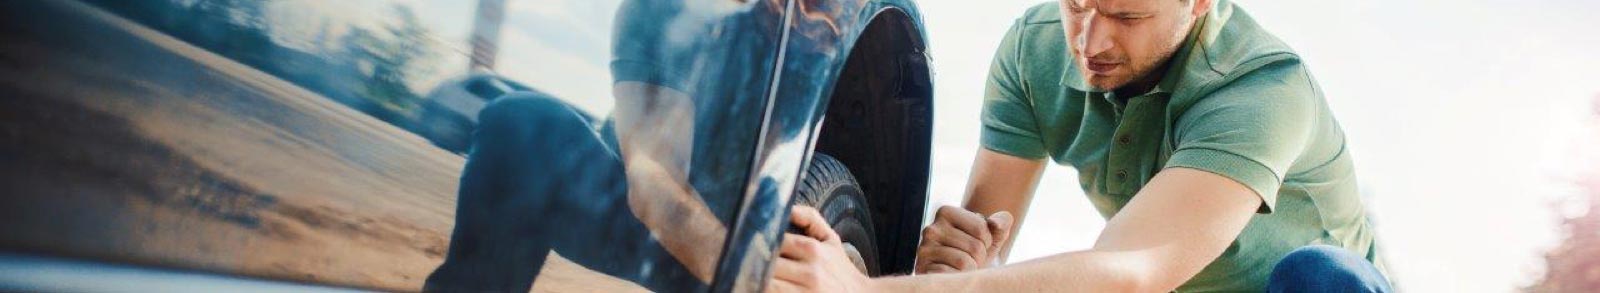 Man chaning a tyre